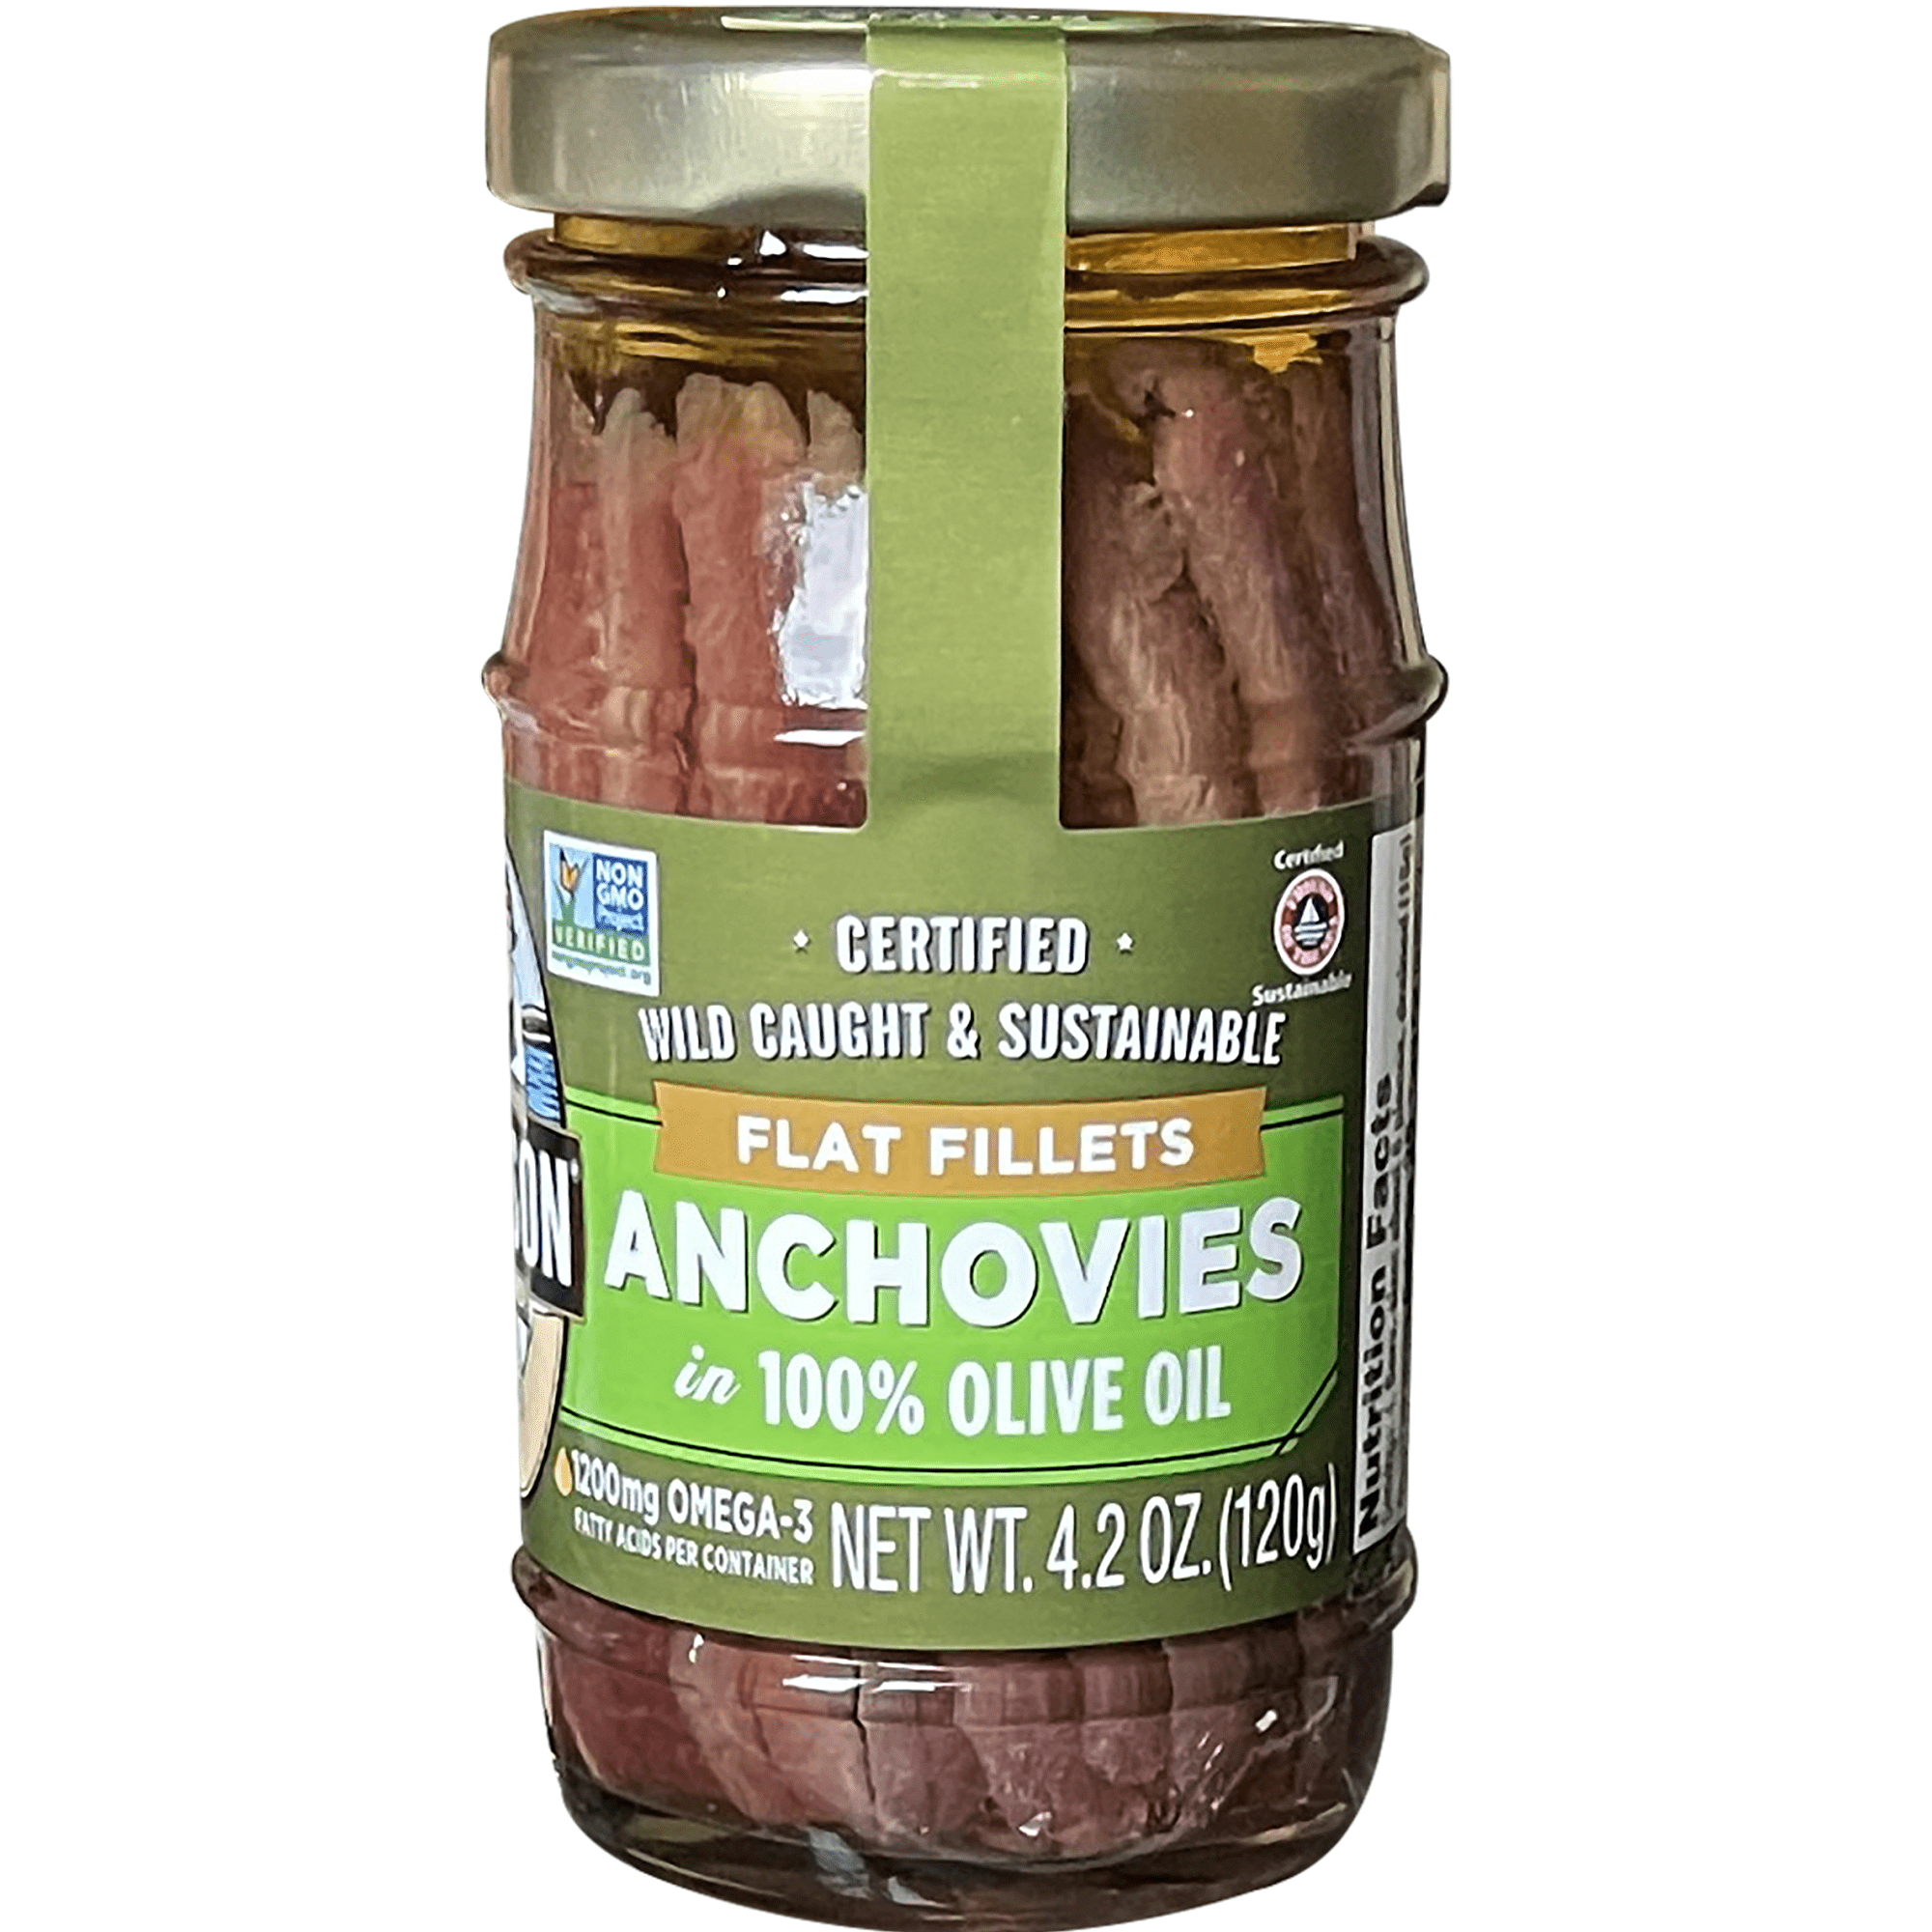 Season Brand Flat Fillet Anchovies in 100% Olive Oil, Glass Jar, 4.2 Ounces